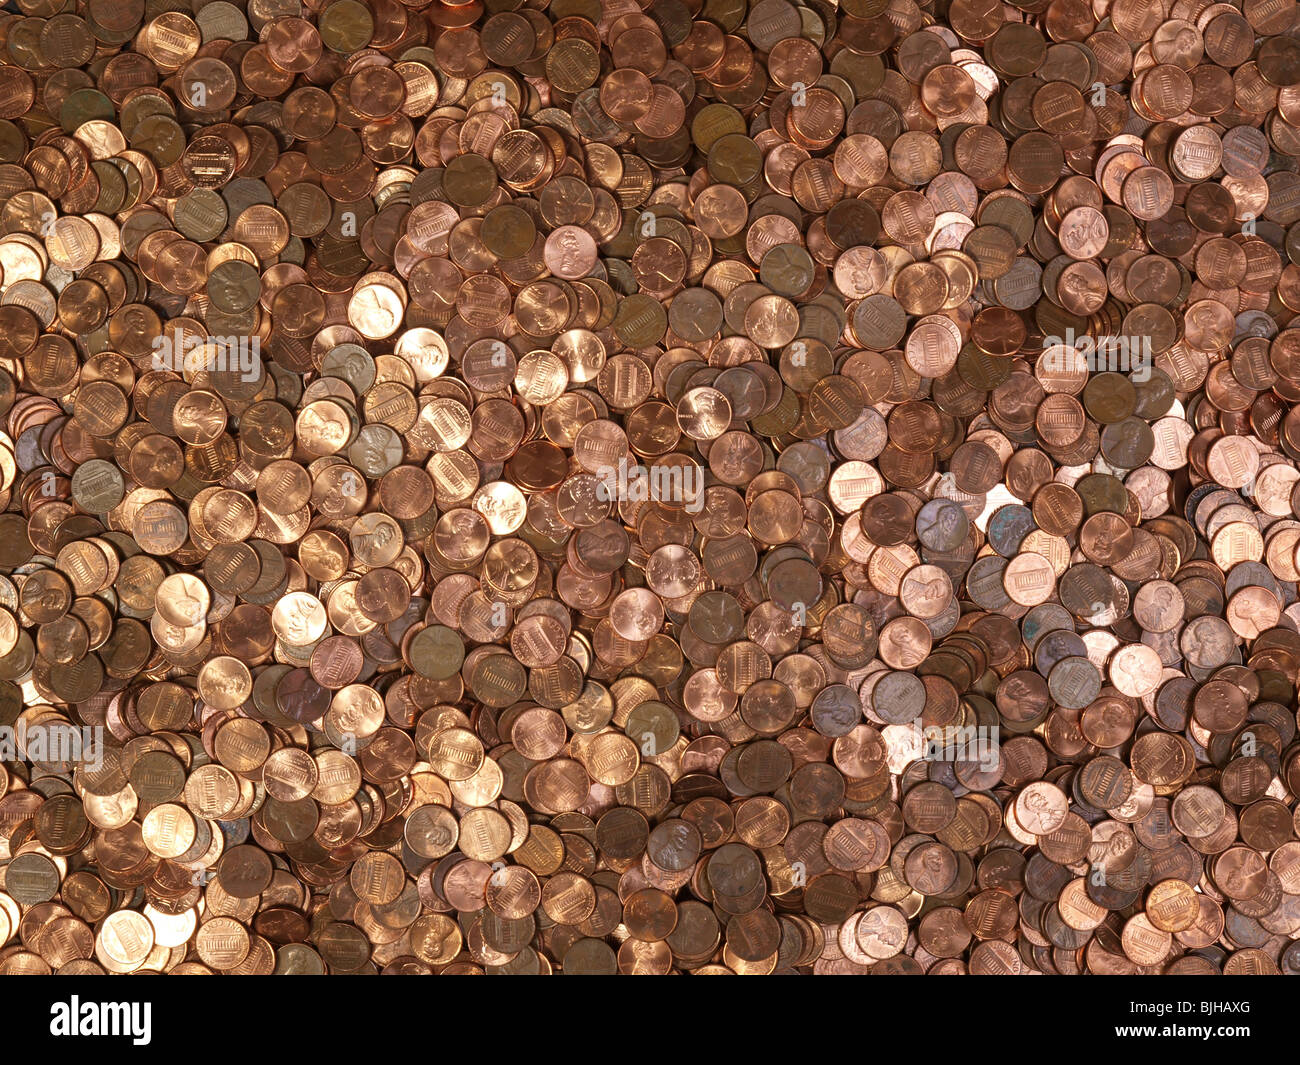 Large pile of shinny American Lincoln pennies. Stock Photo